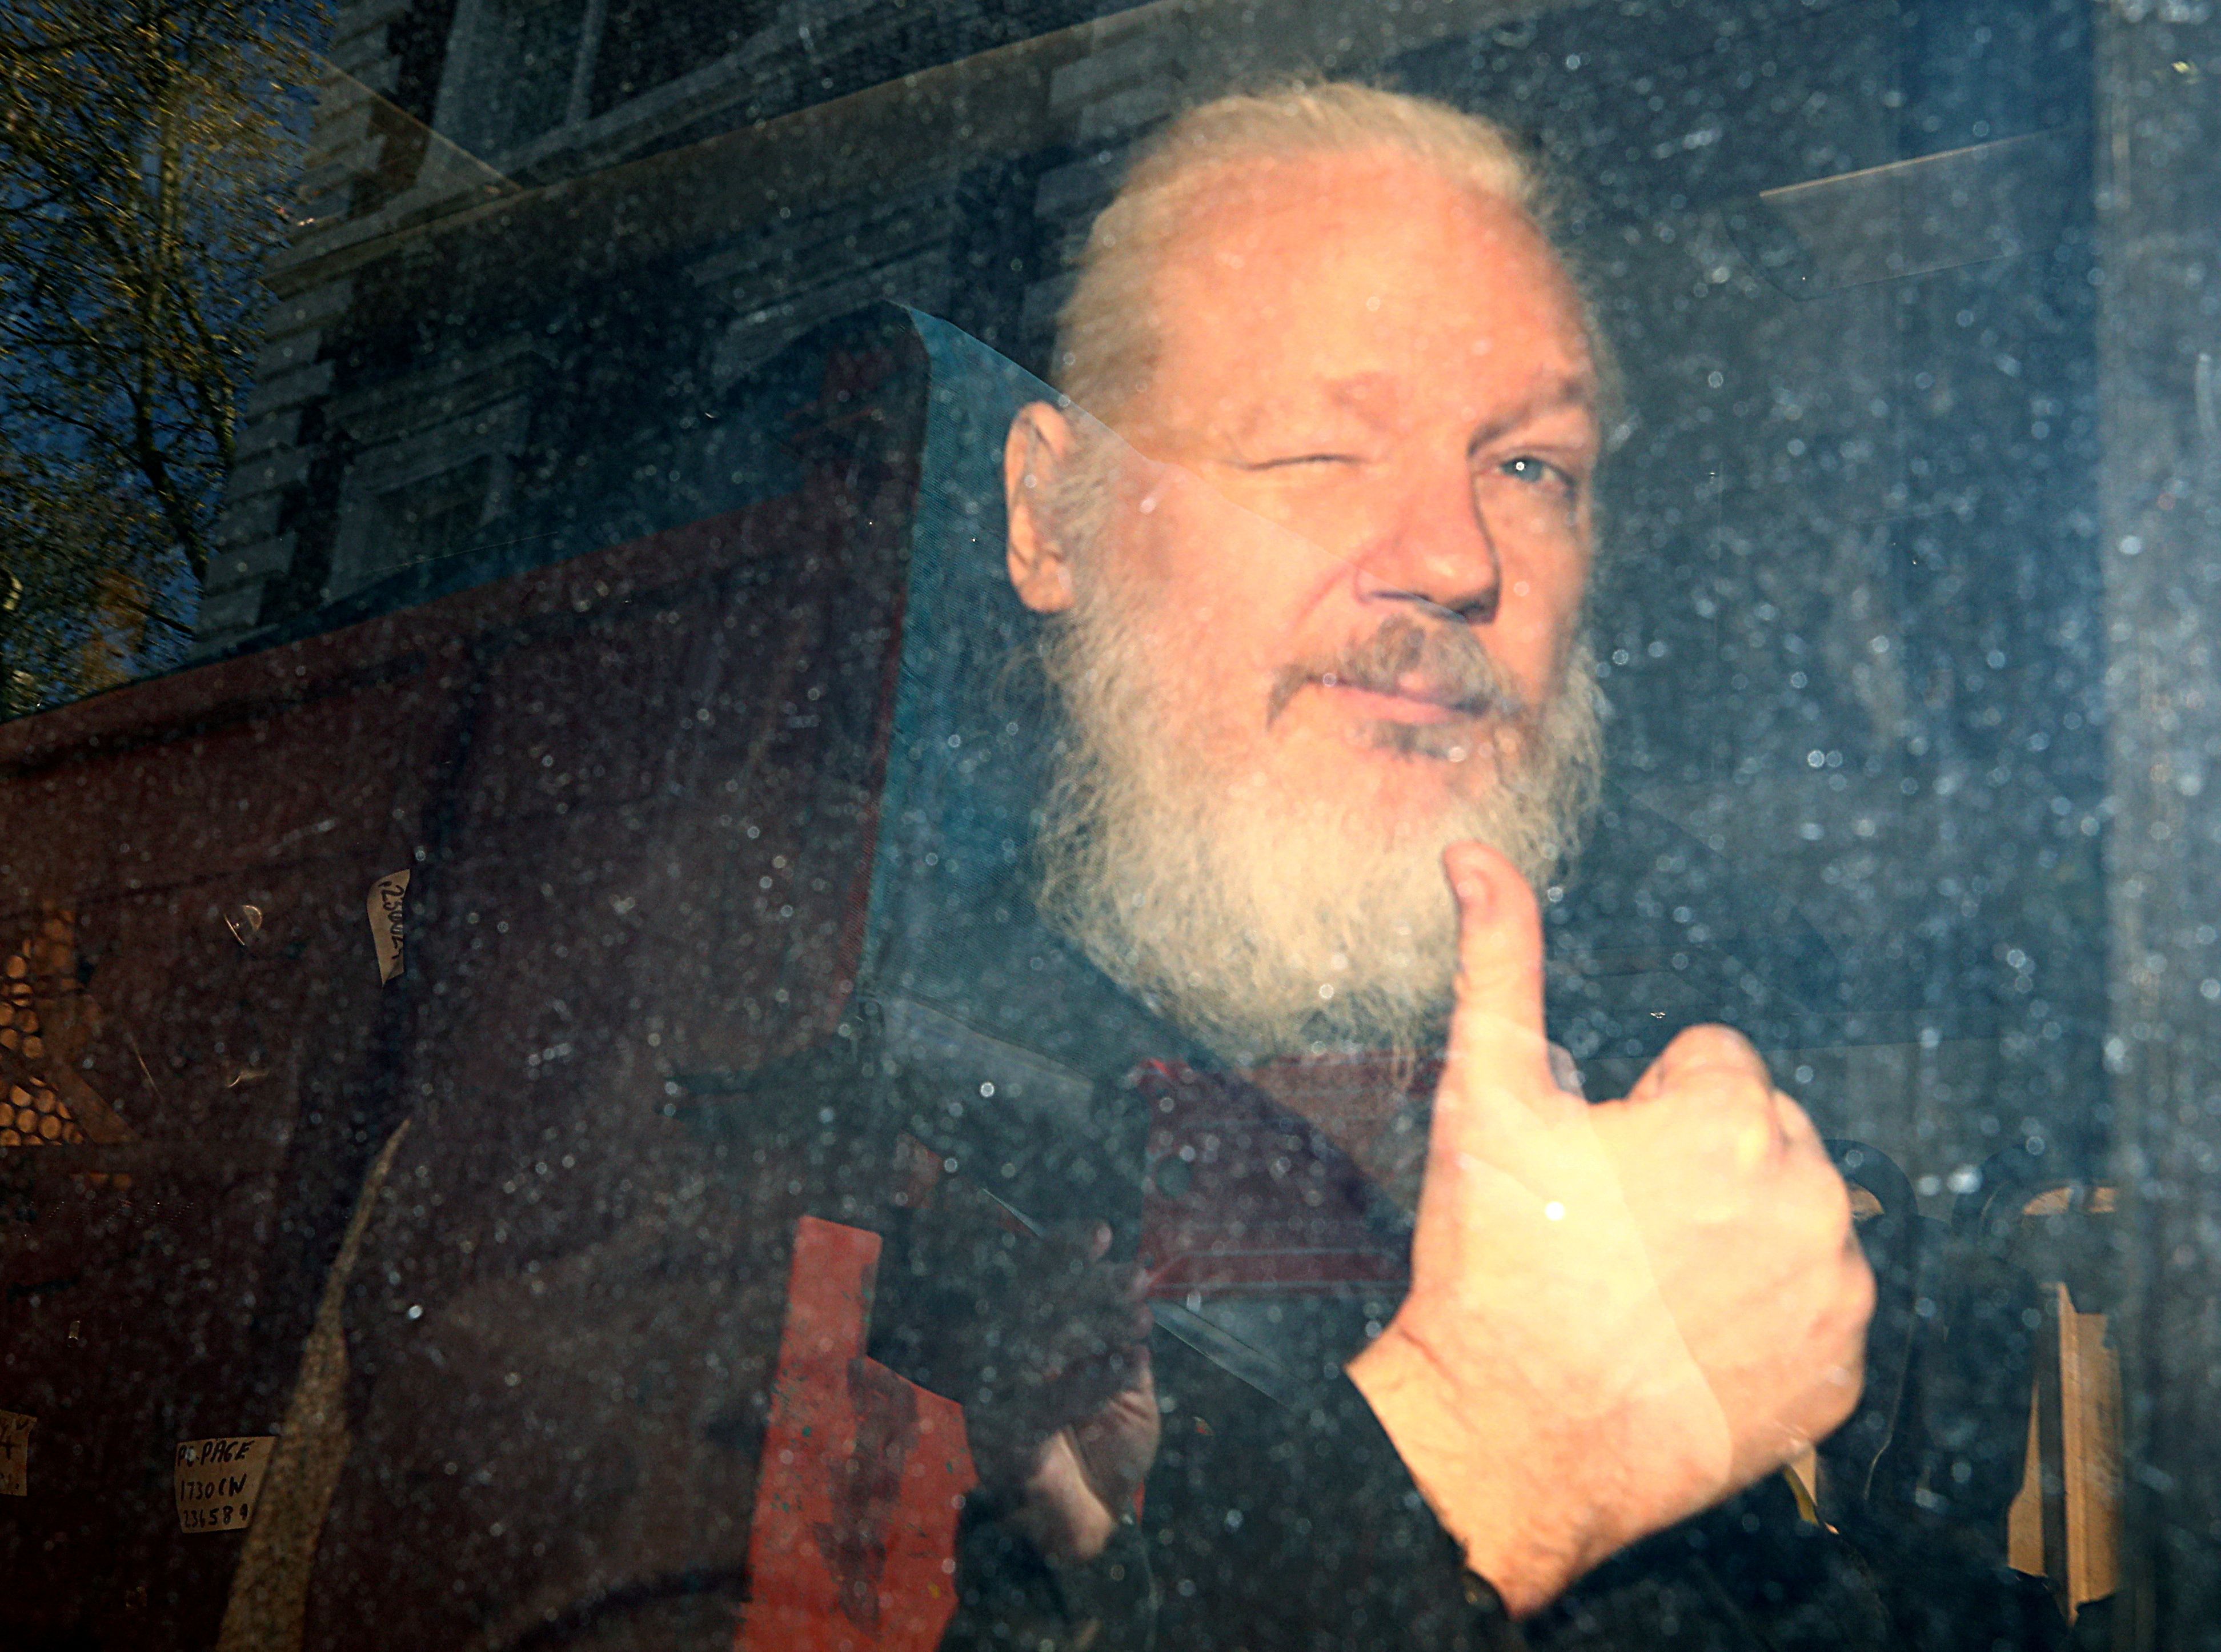 assange legal team sees 'no resolution' to us spying charges despite talk of plea deal